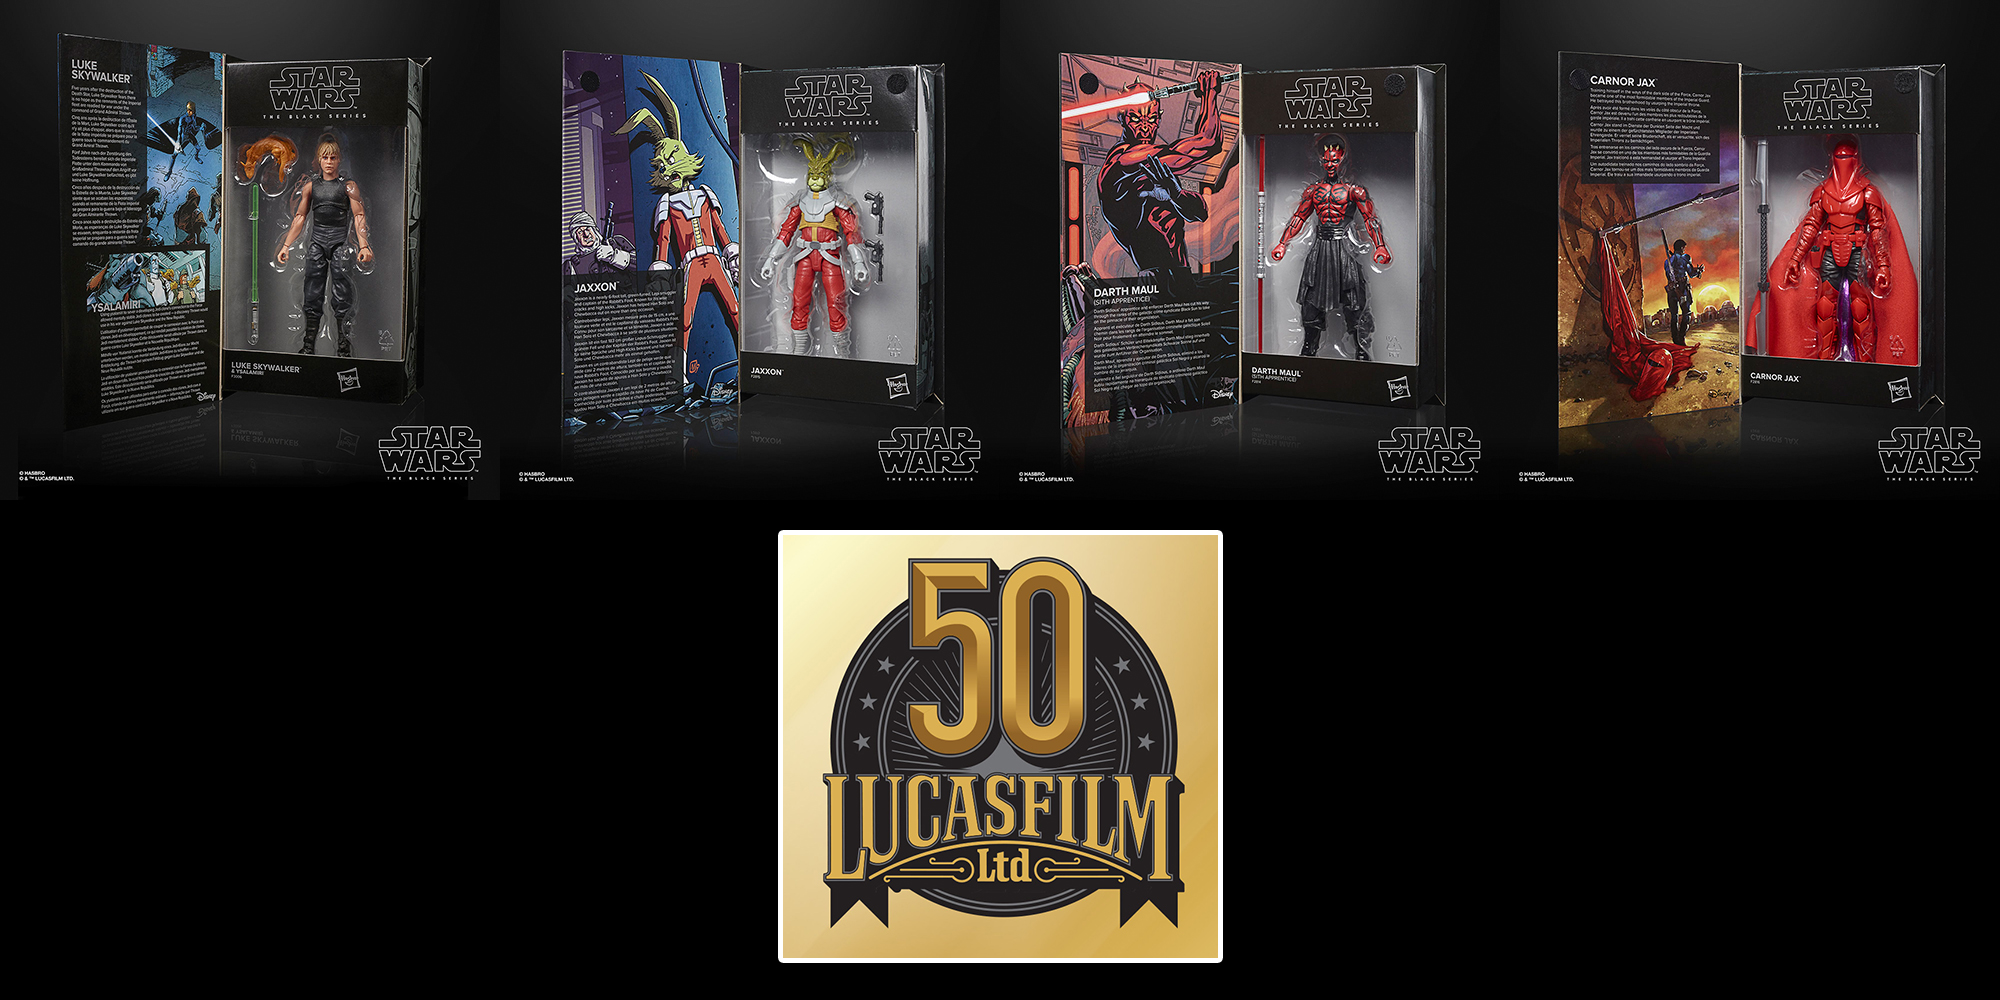 New Black Series 6" Figures Announced For The 50th Anniversary Of Lucasfilm!